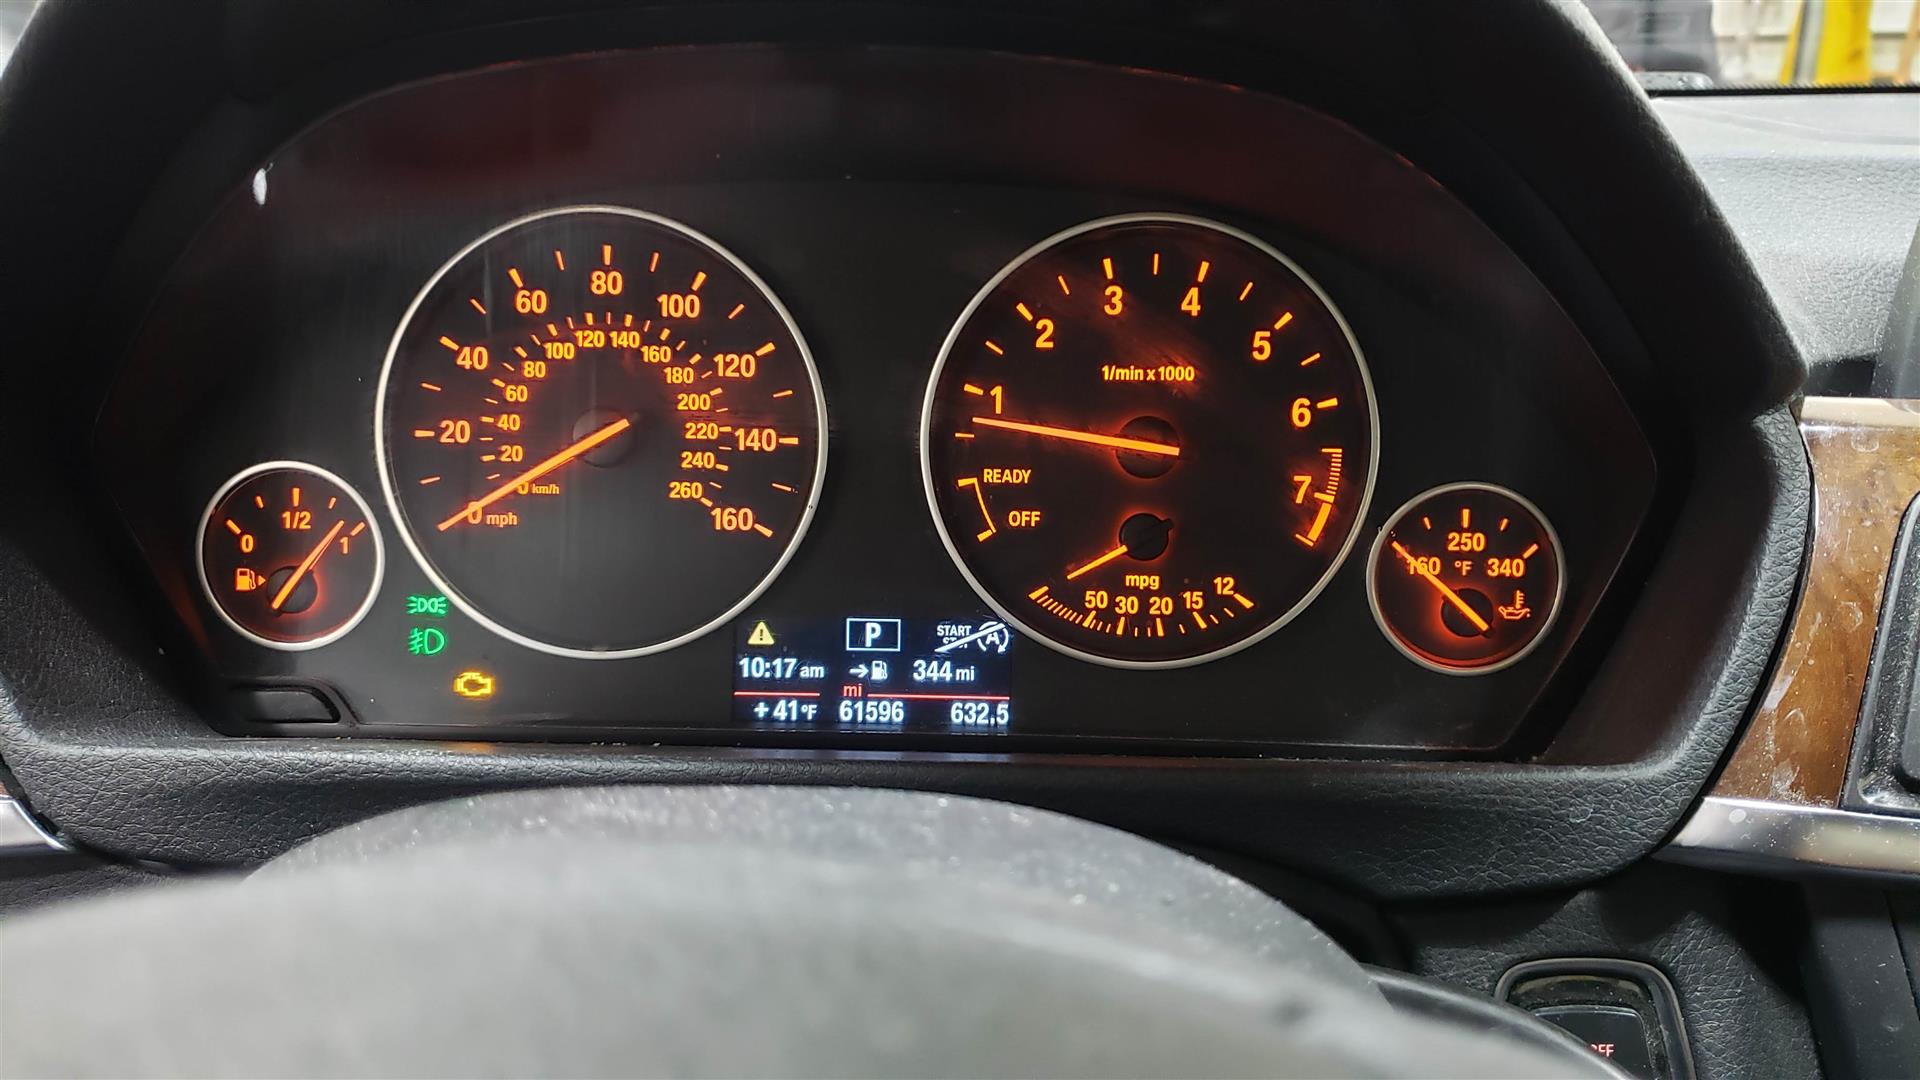 My check engine light is on, what do I do now?